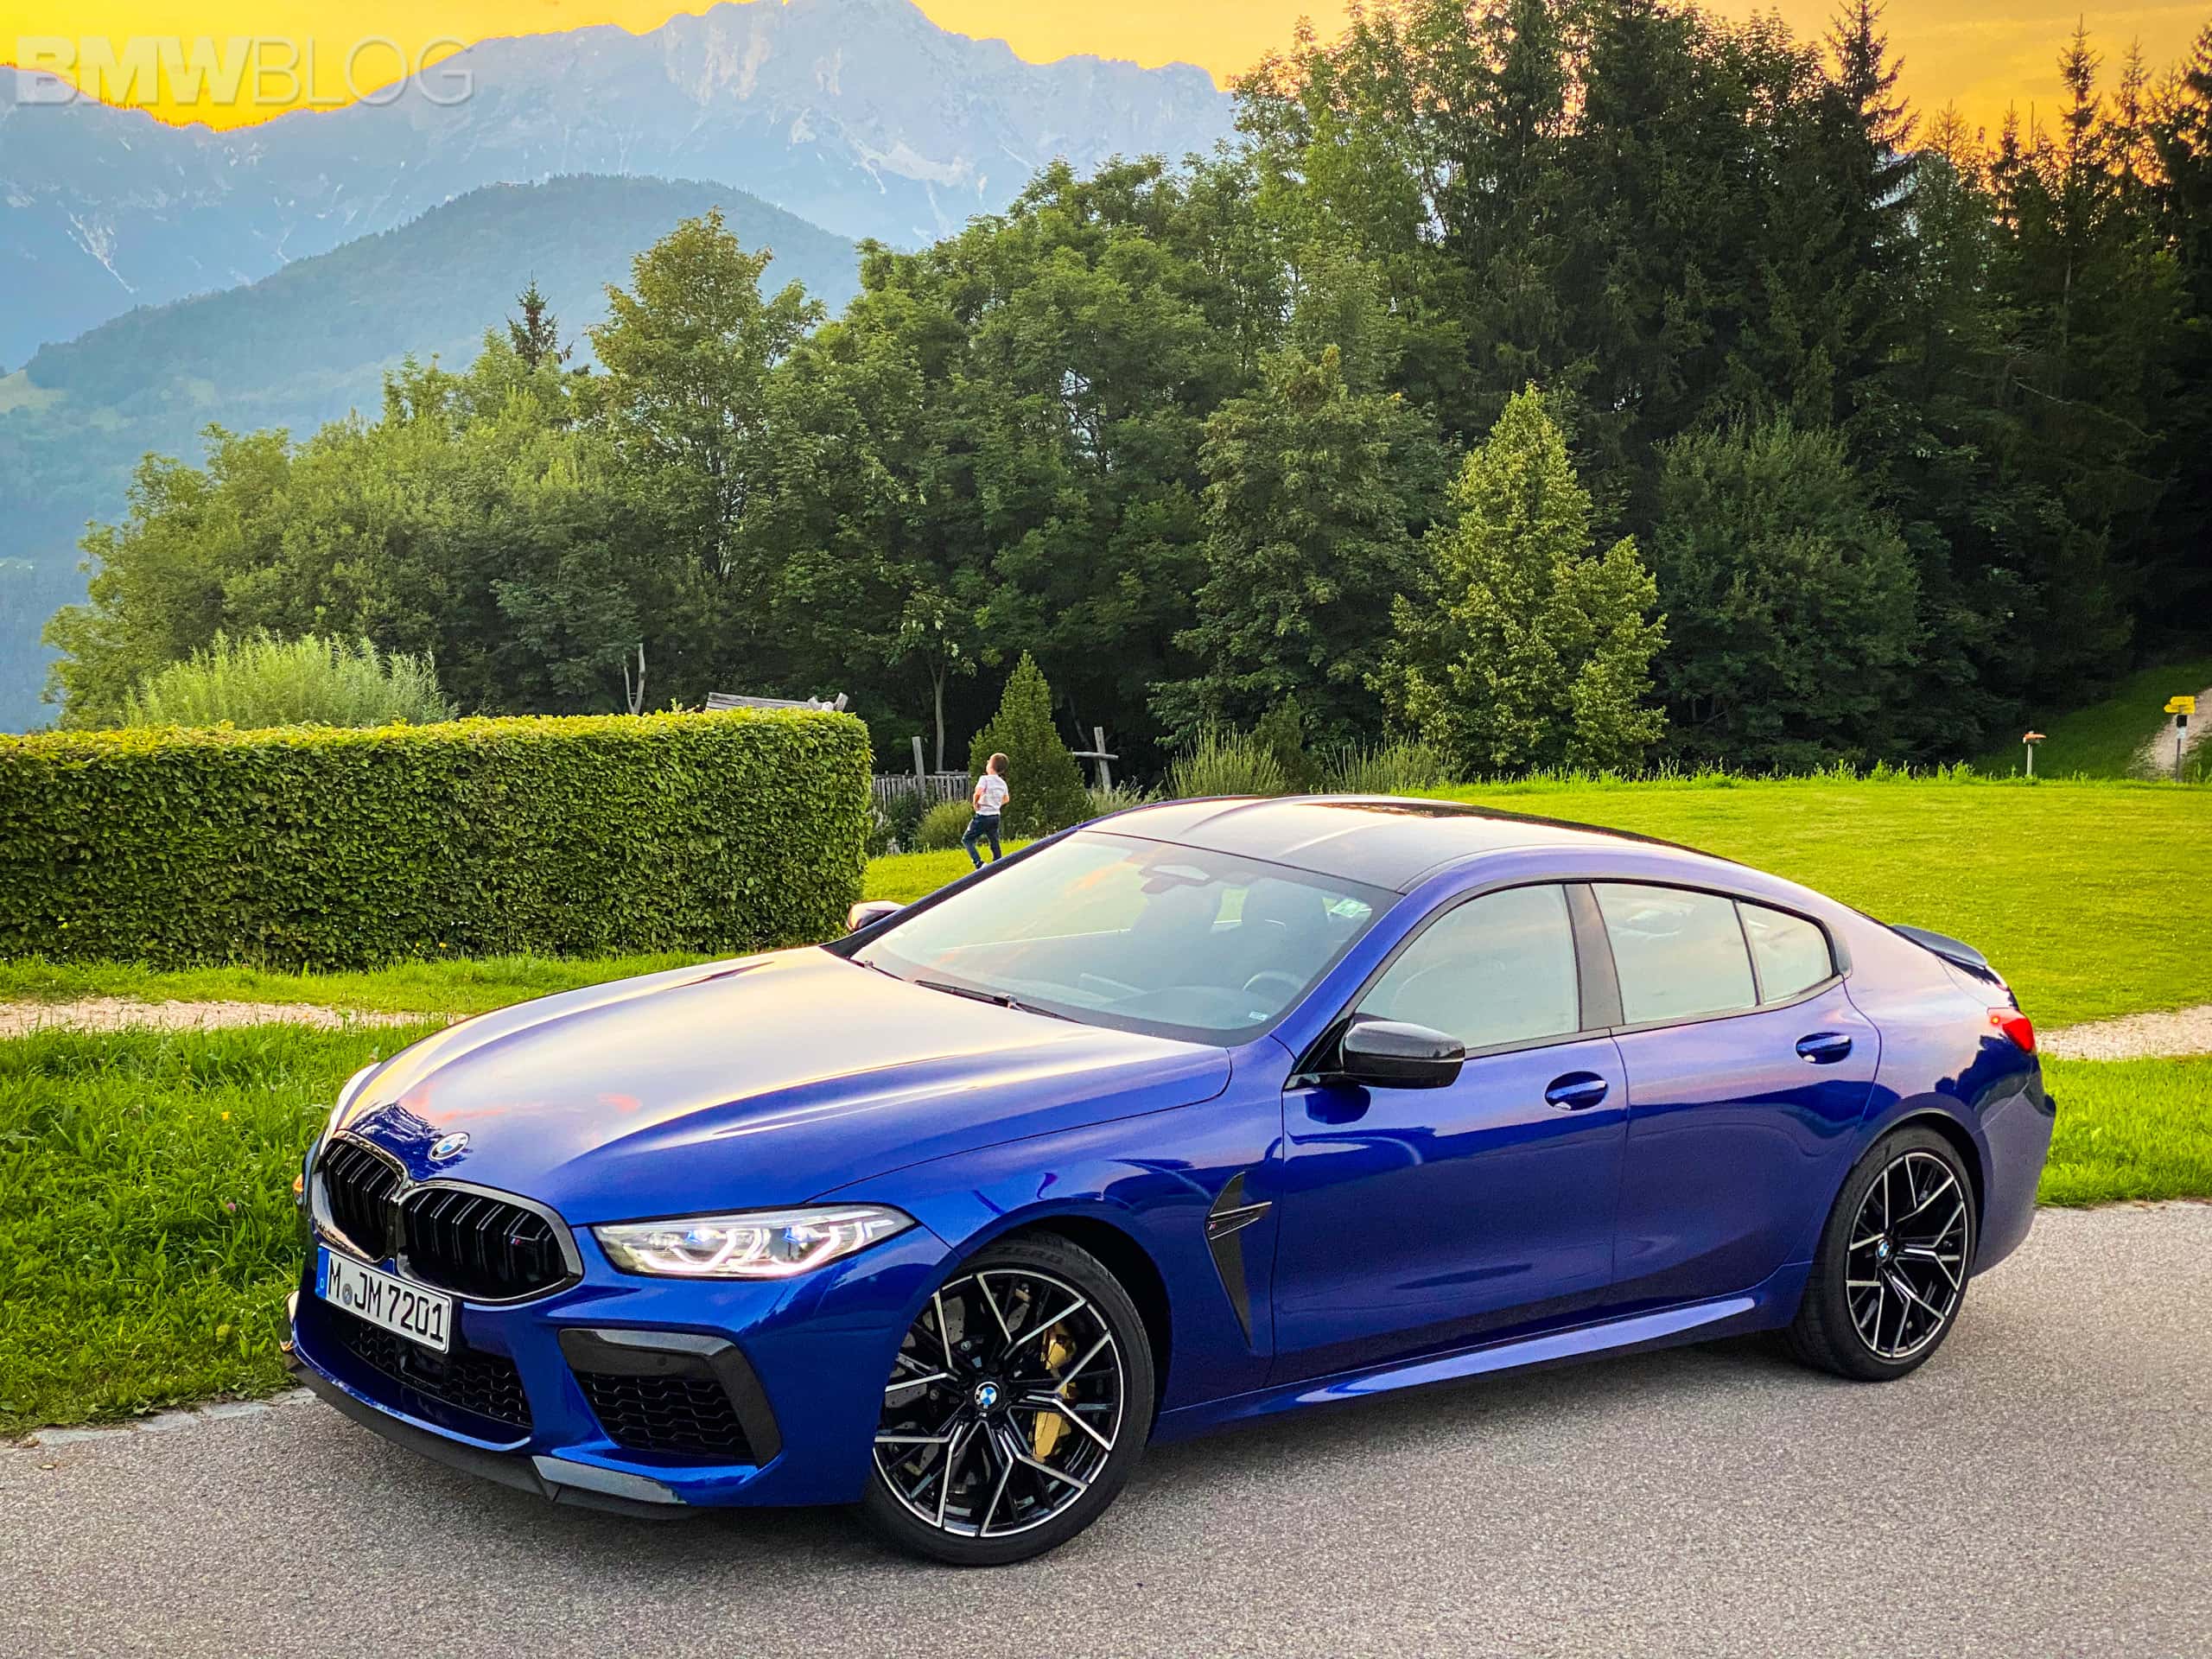 TEST DRIVE: 2022 BMW M8 Competition Gran Coupe – Power, Poise and Beauty